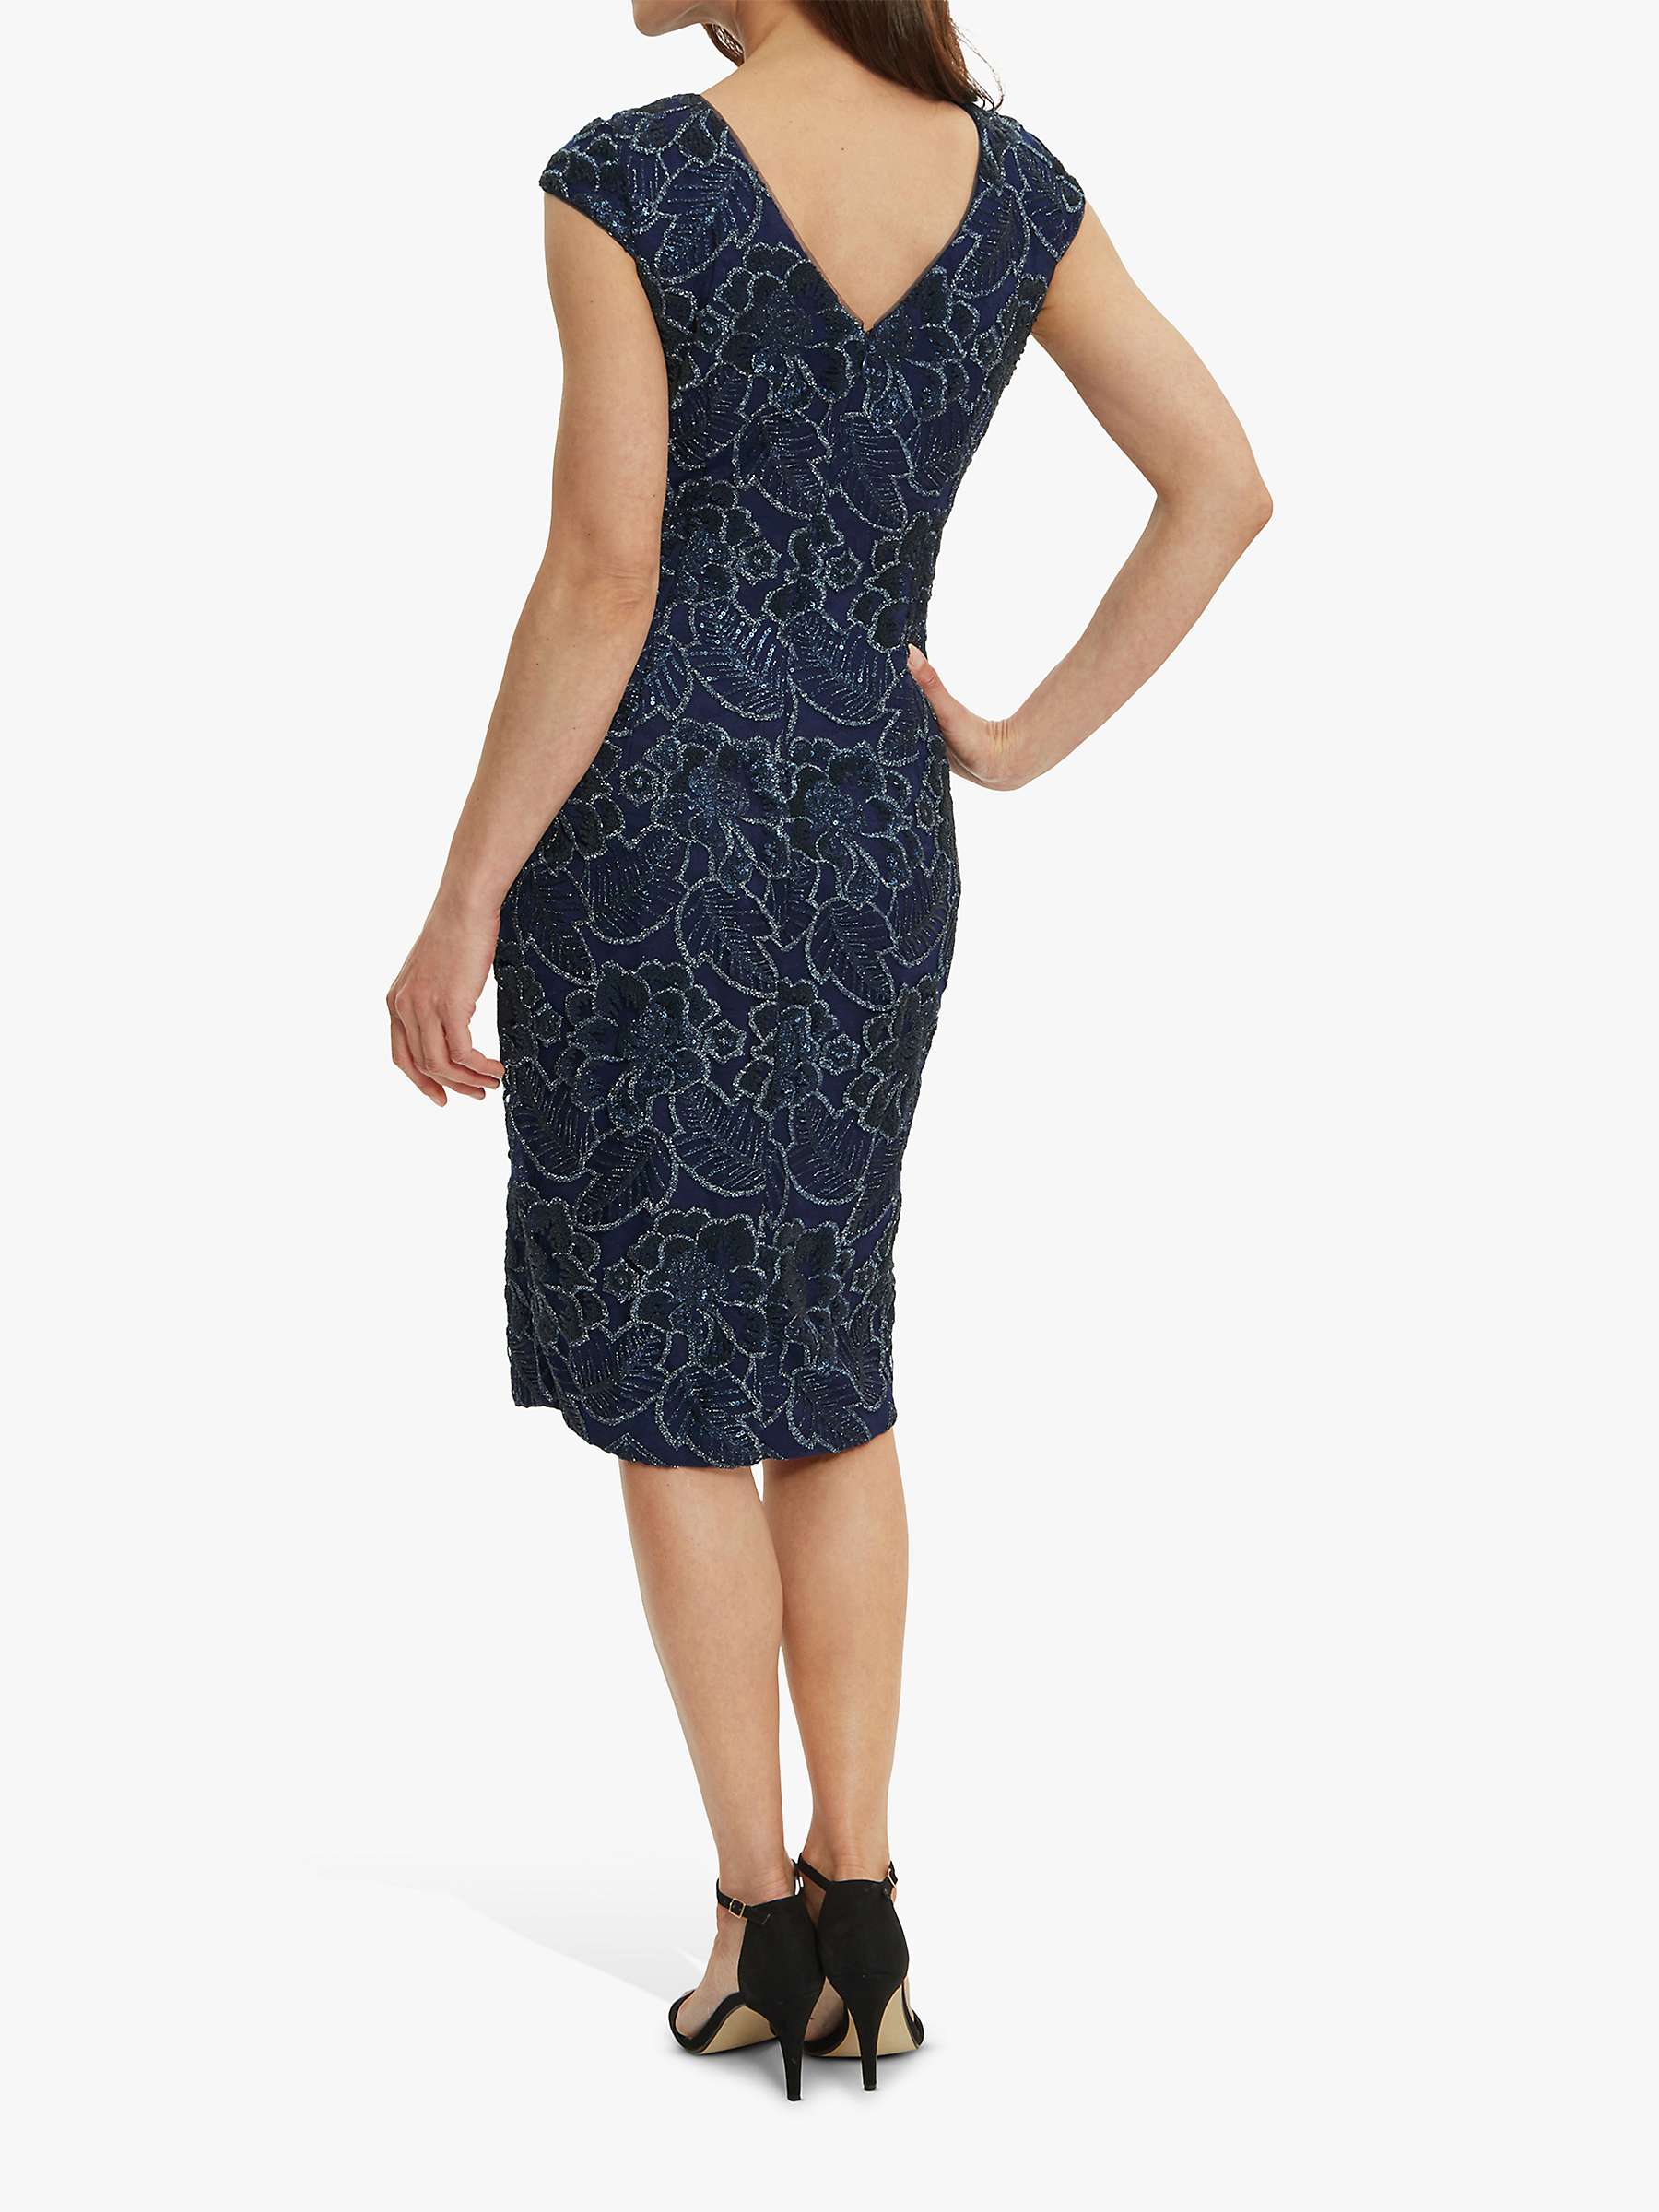 Buy Gina Bacconi Xena Floral Lace Cocktail Dress, Navy Online at johnlewis.com